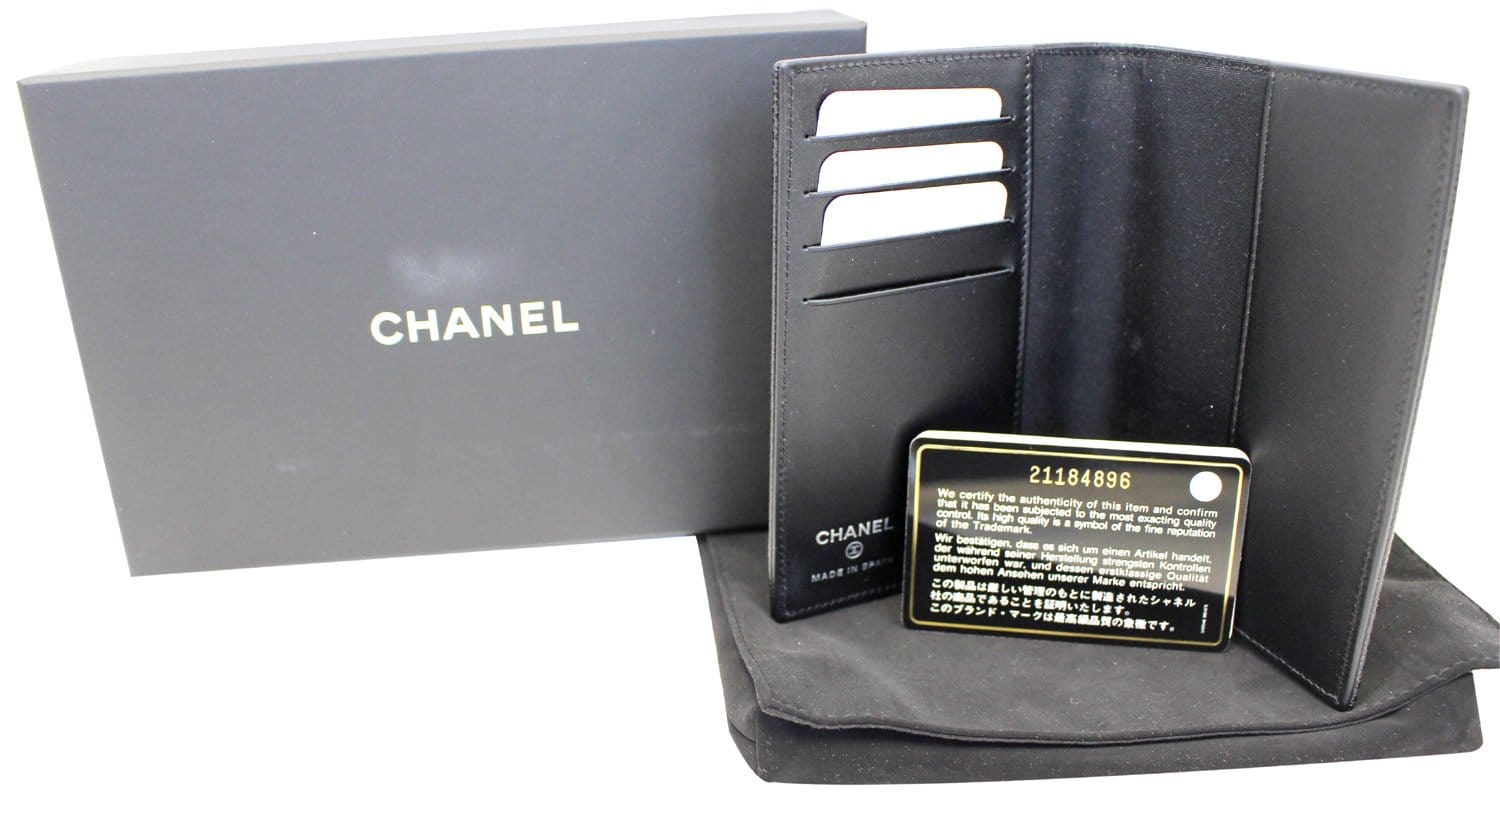 Chanel - Authenticated Chanel 19 Wallet - Leather Black Plain for Women, Never Worn